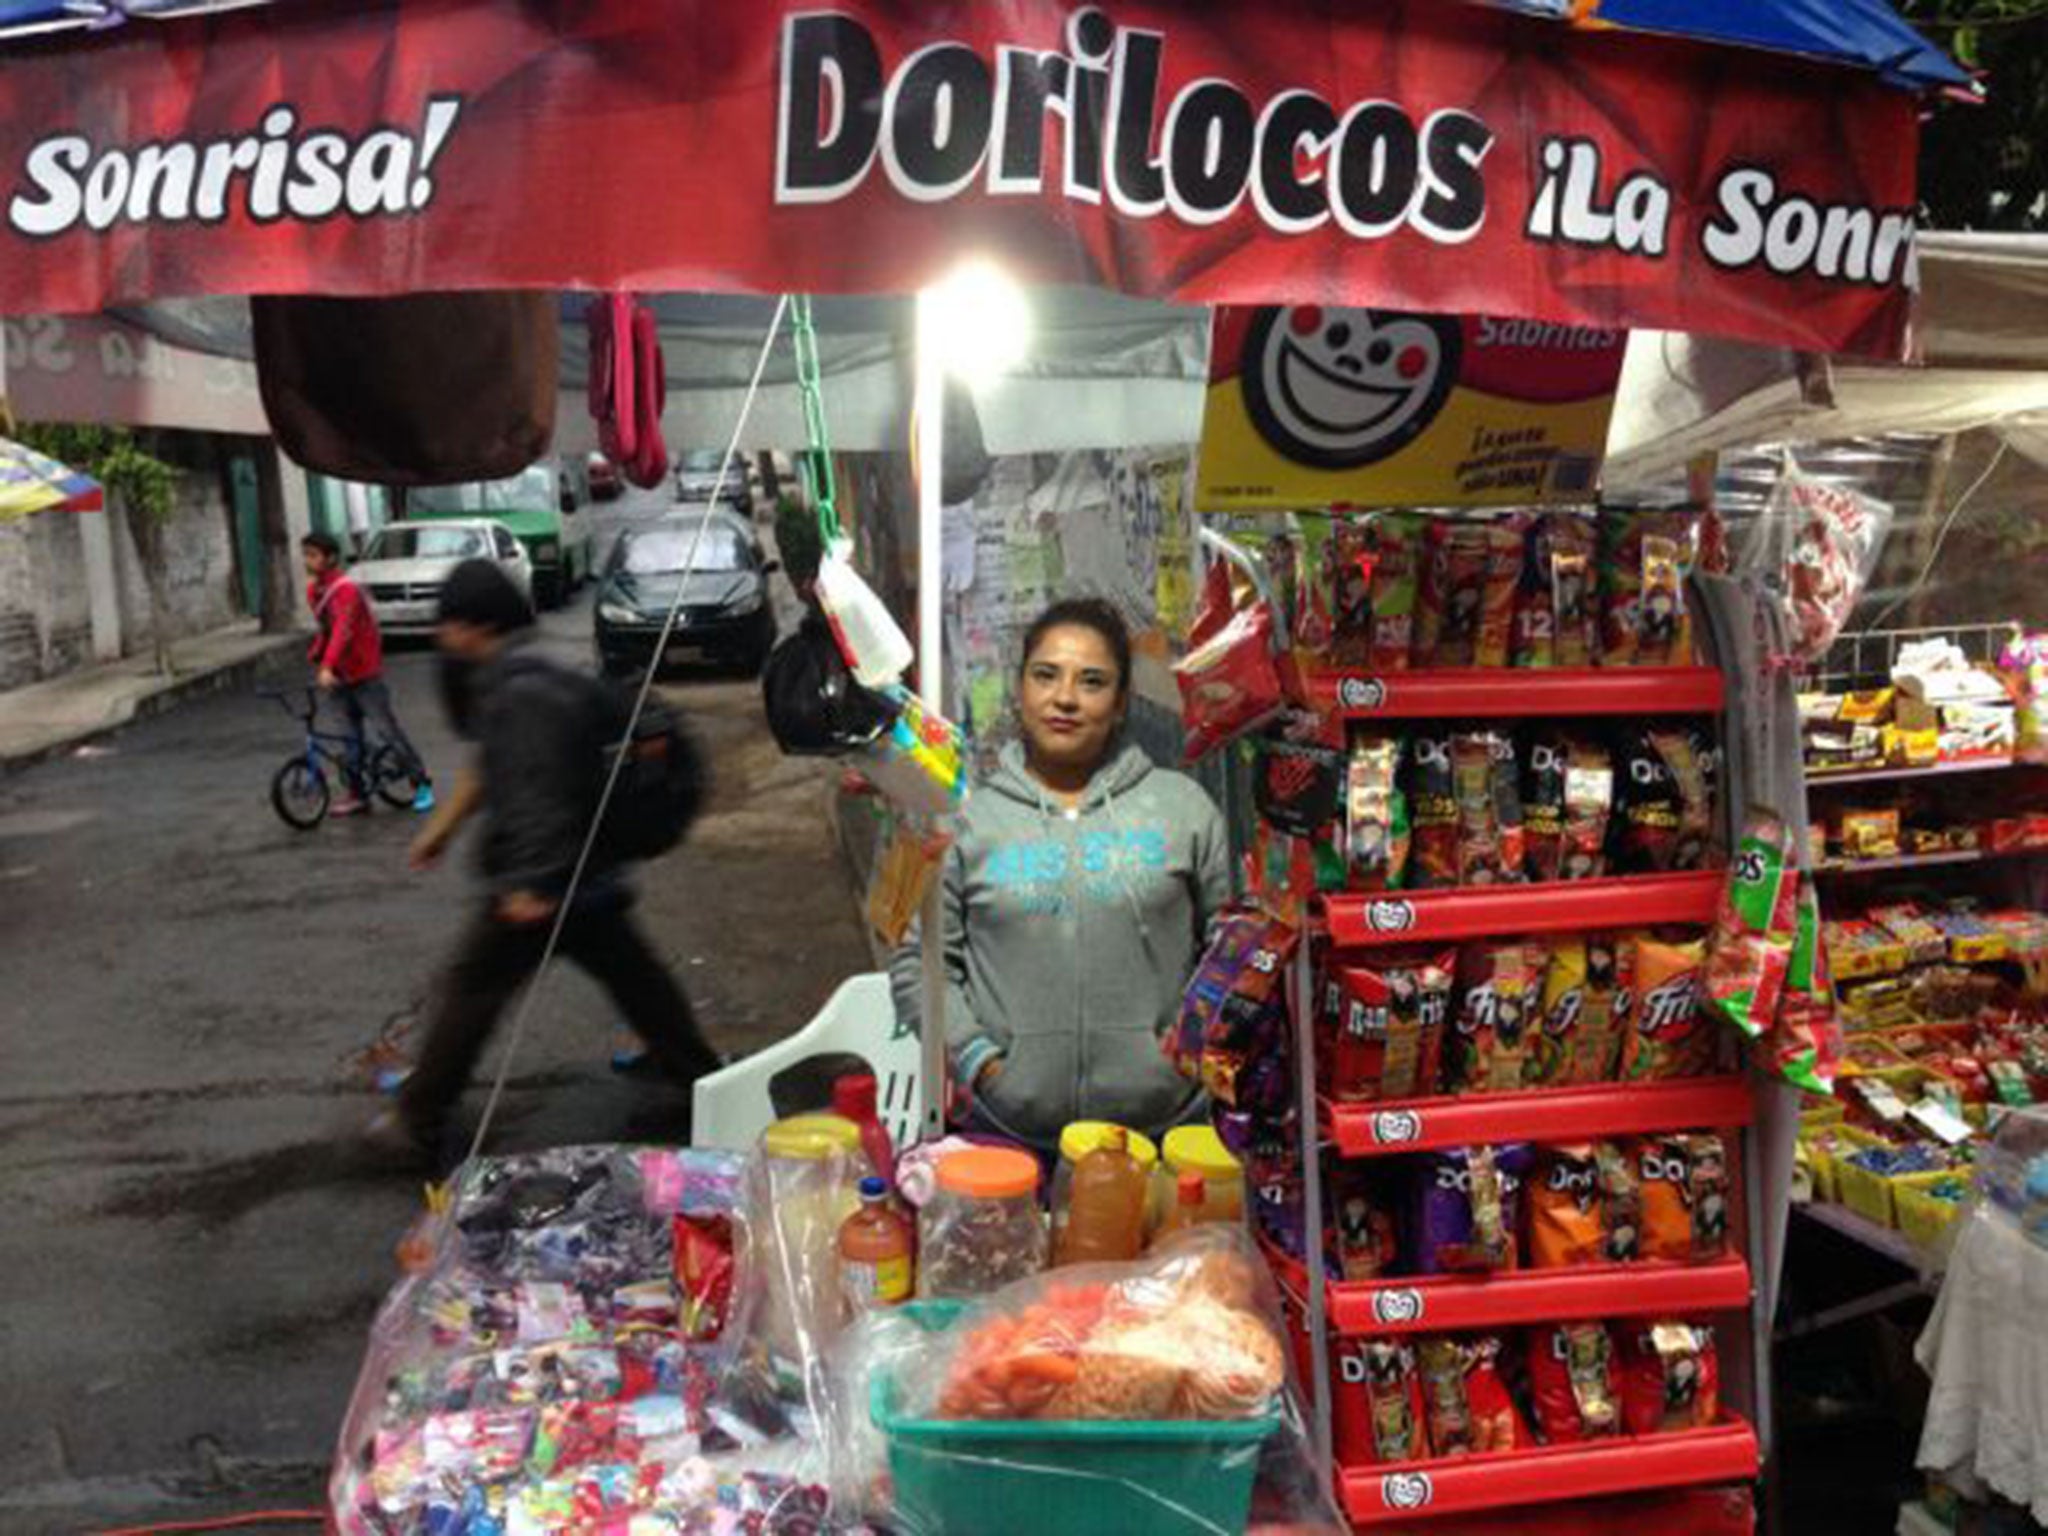 A street vendor in Mexico City sells Dorilocos, which are topped with carrot, jimaca, cucumber, peanuts, pork rinds, spices and hot sauce (The Washington Post)